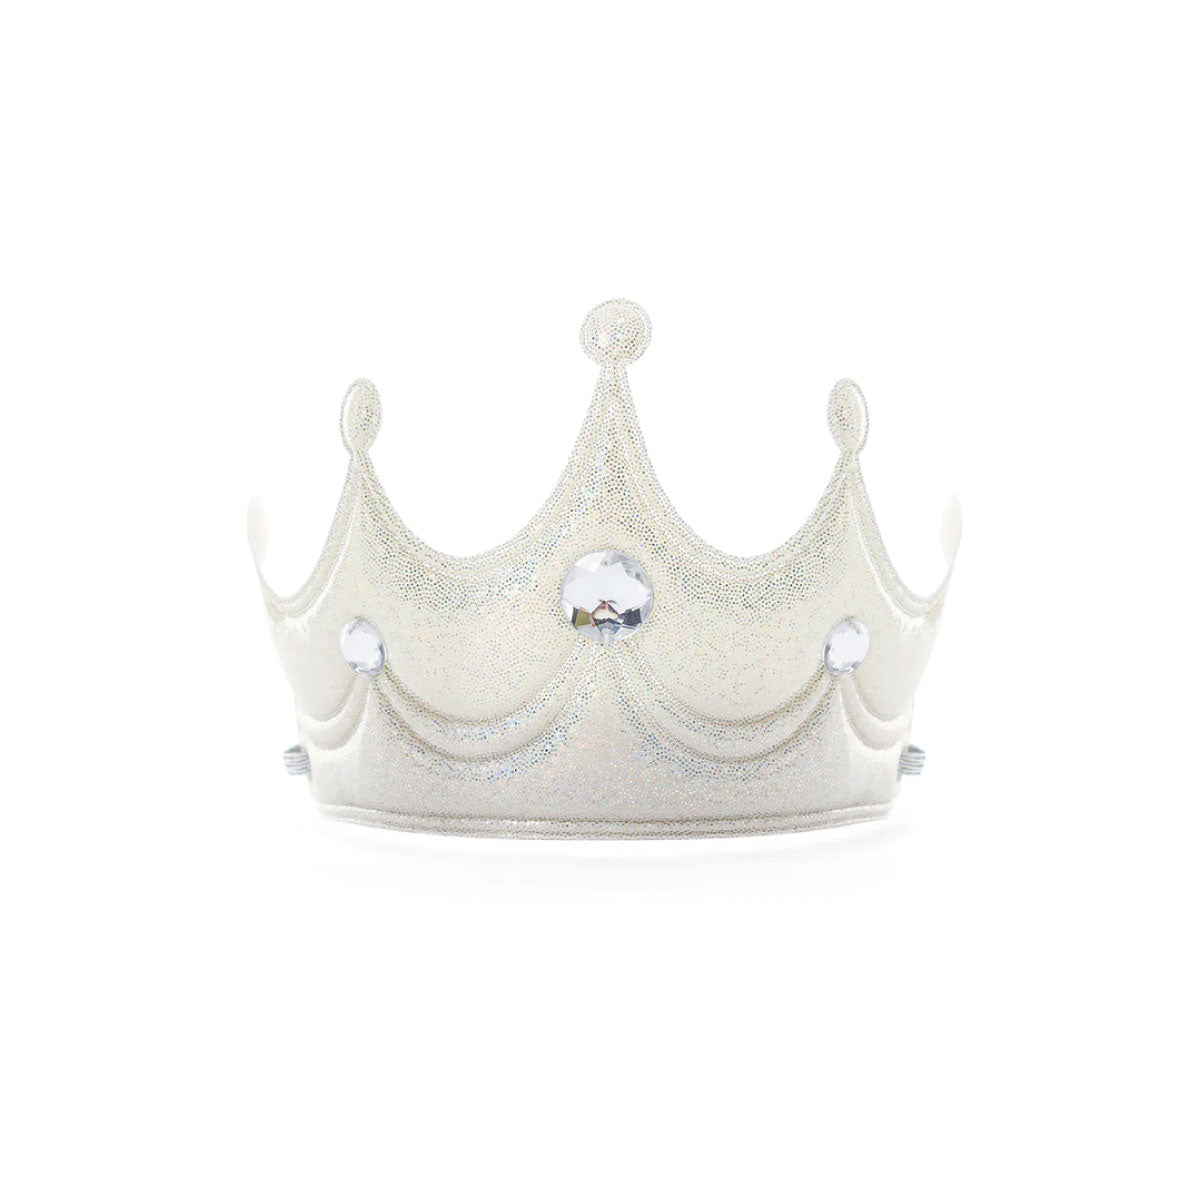 Silver Princess Soft Crown from Little Adventures